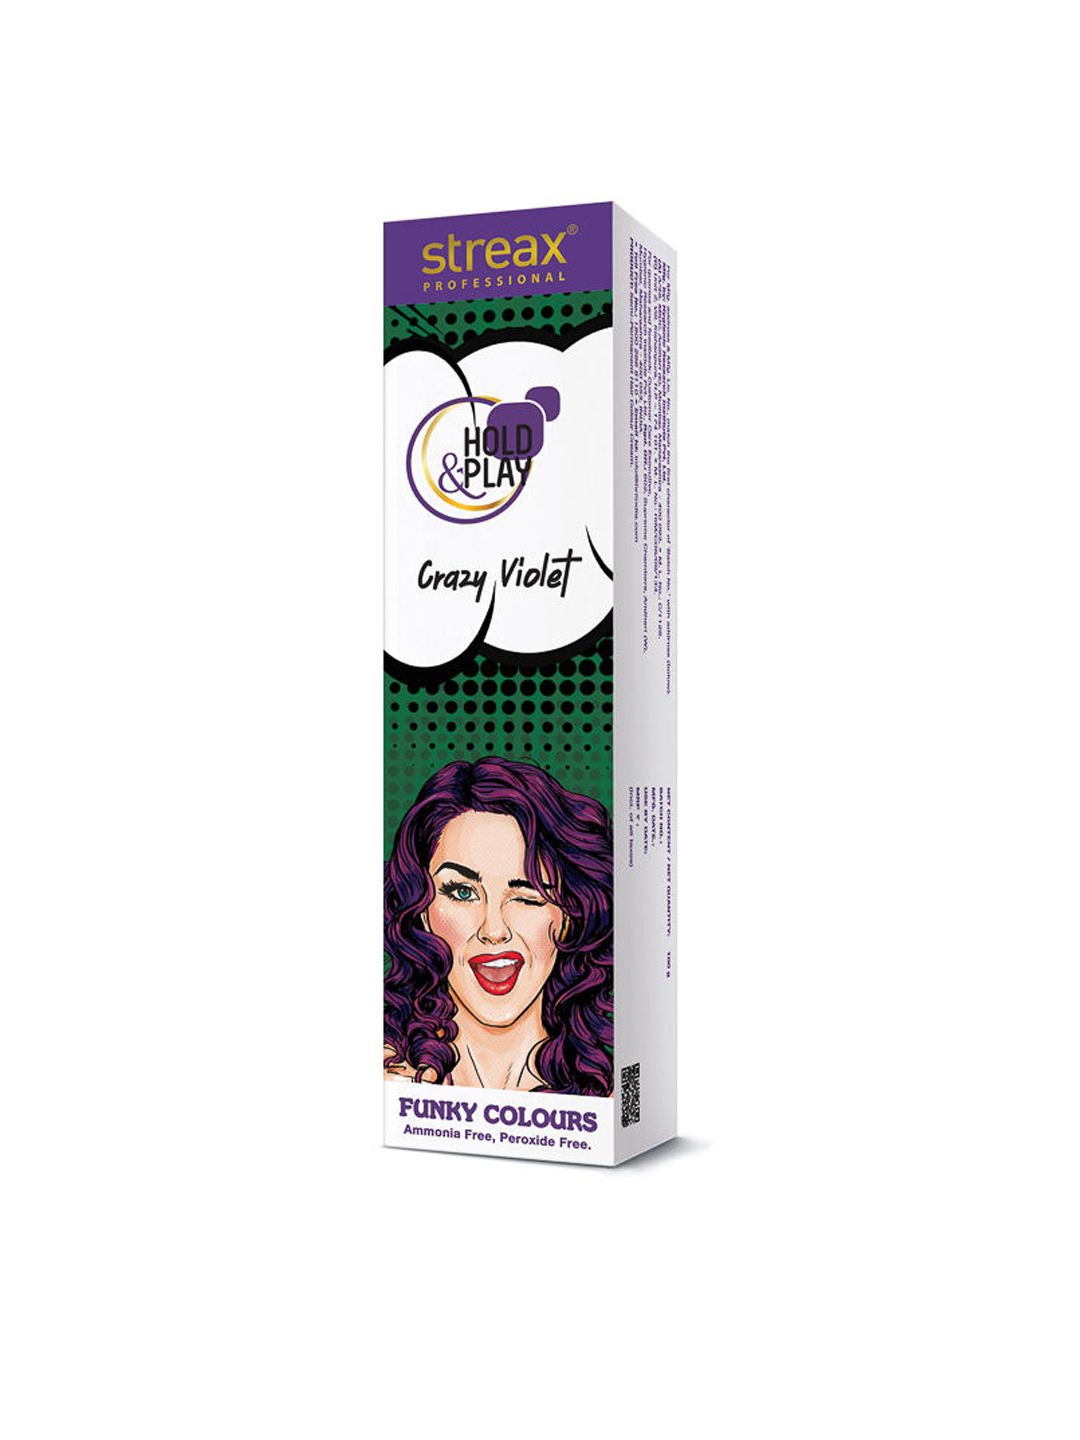 Streax Professional Hold & Play Funky Colours Crazy Violet- 100 g Price in India